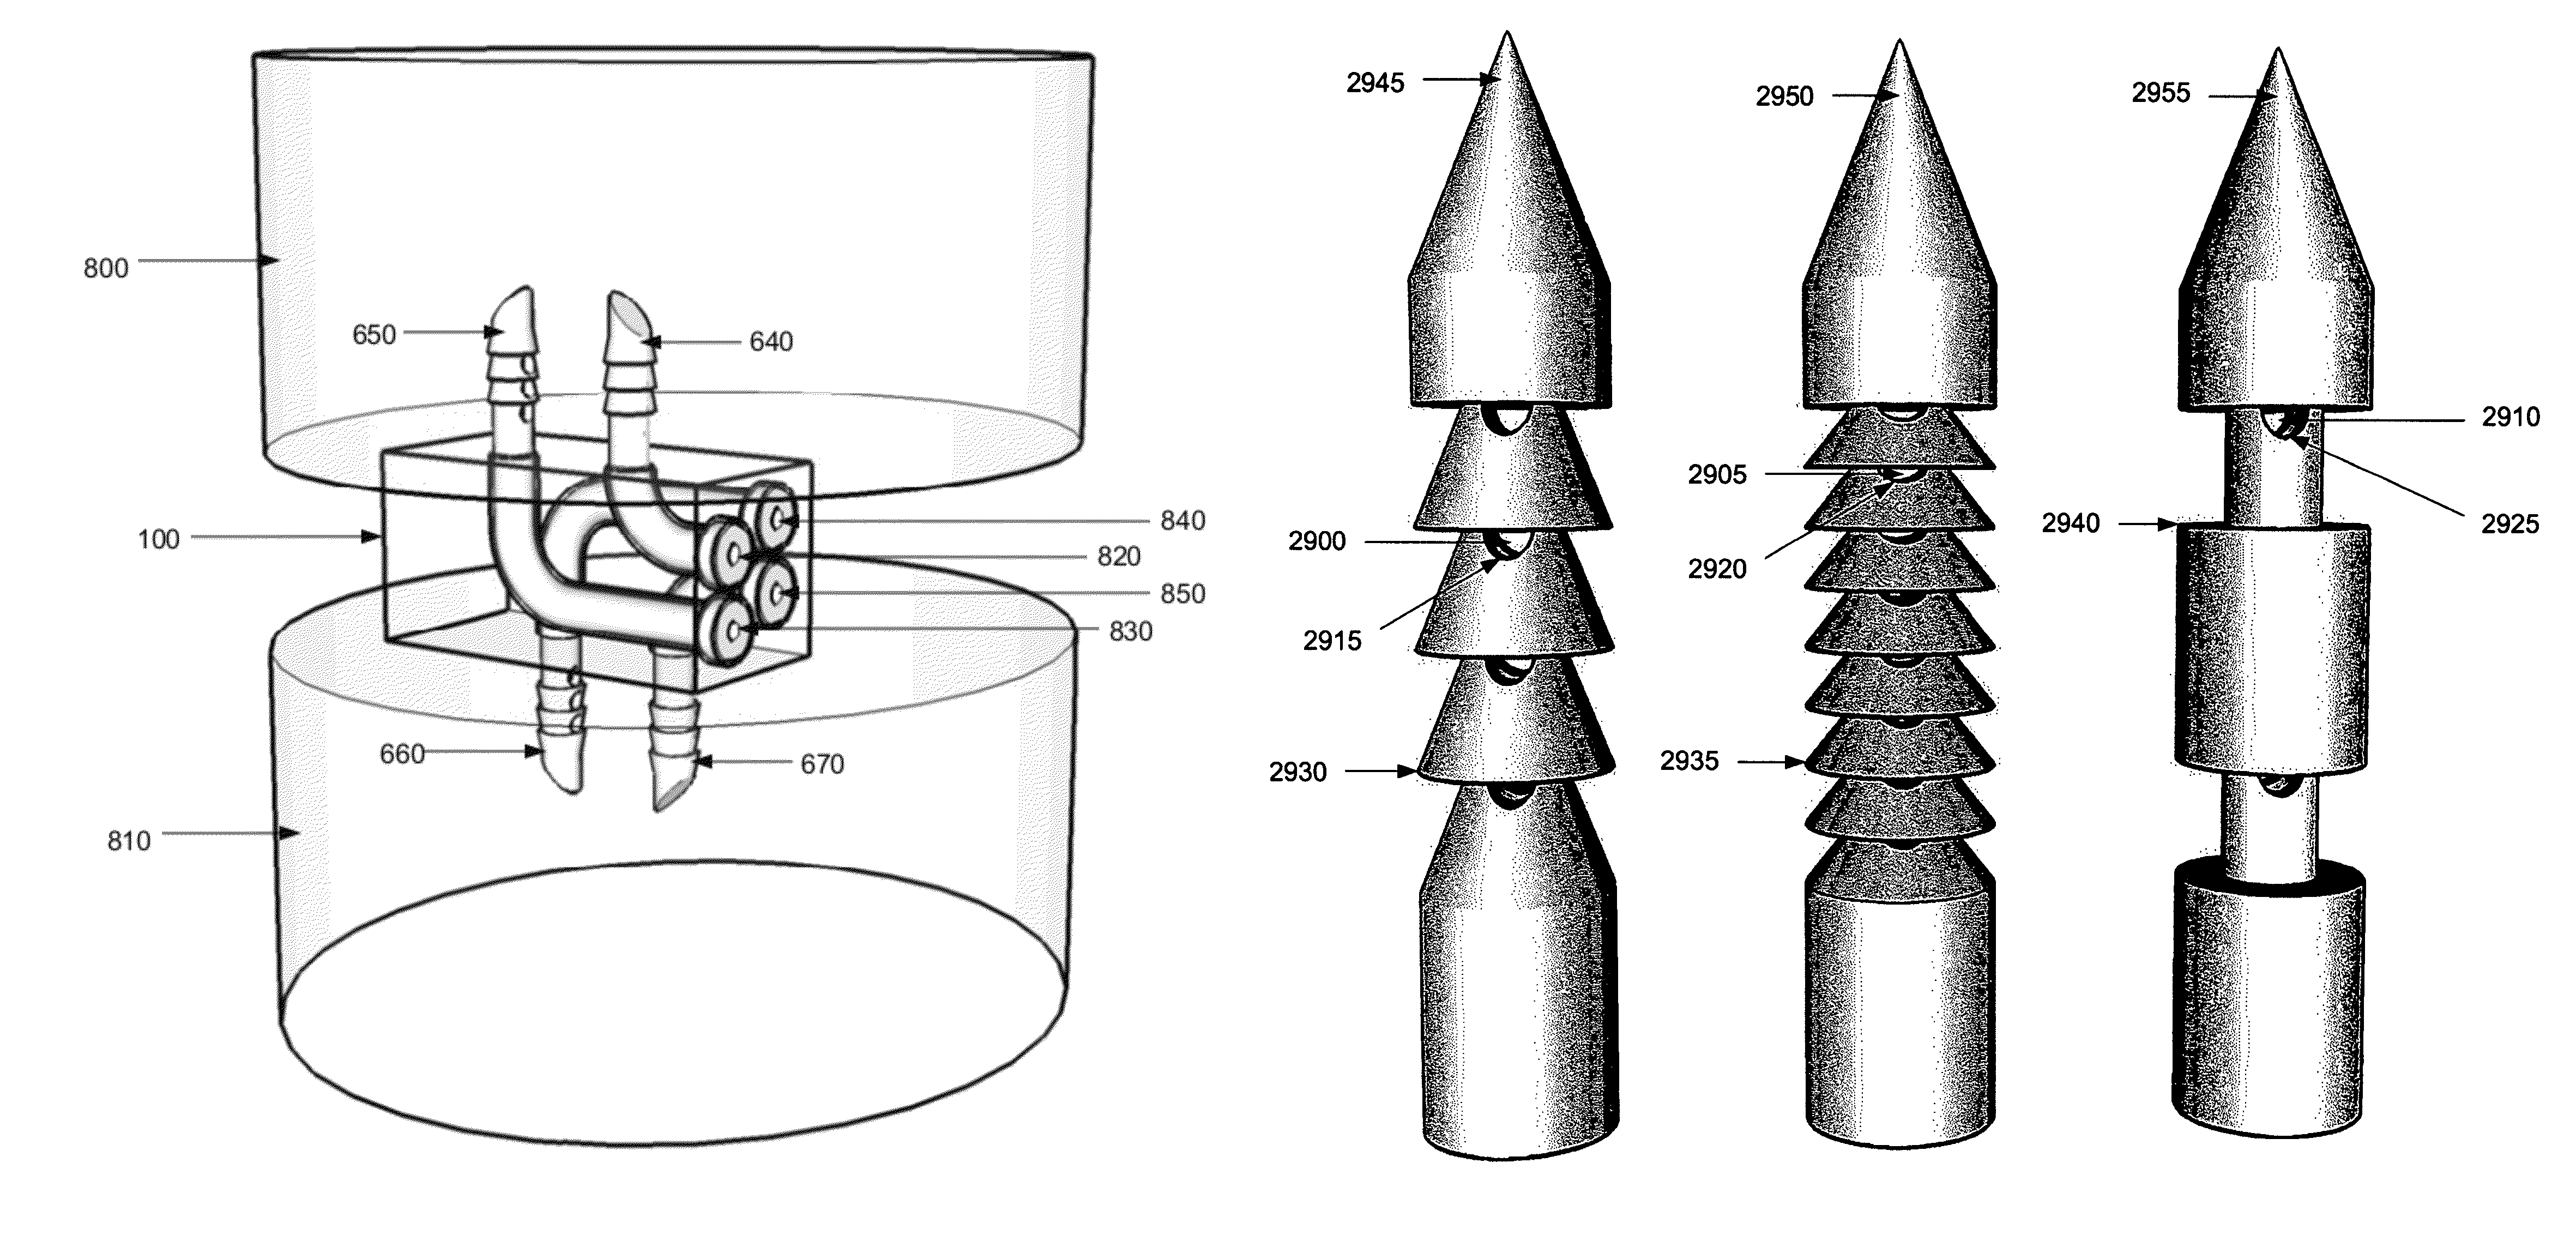 Intervertebral fusion device and method of use